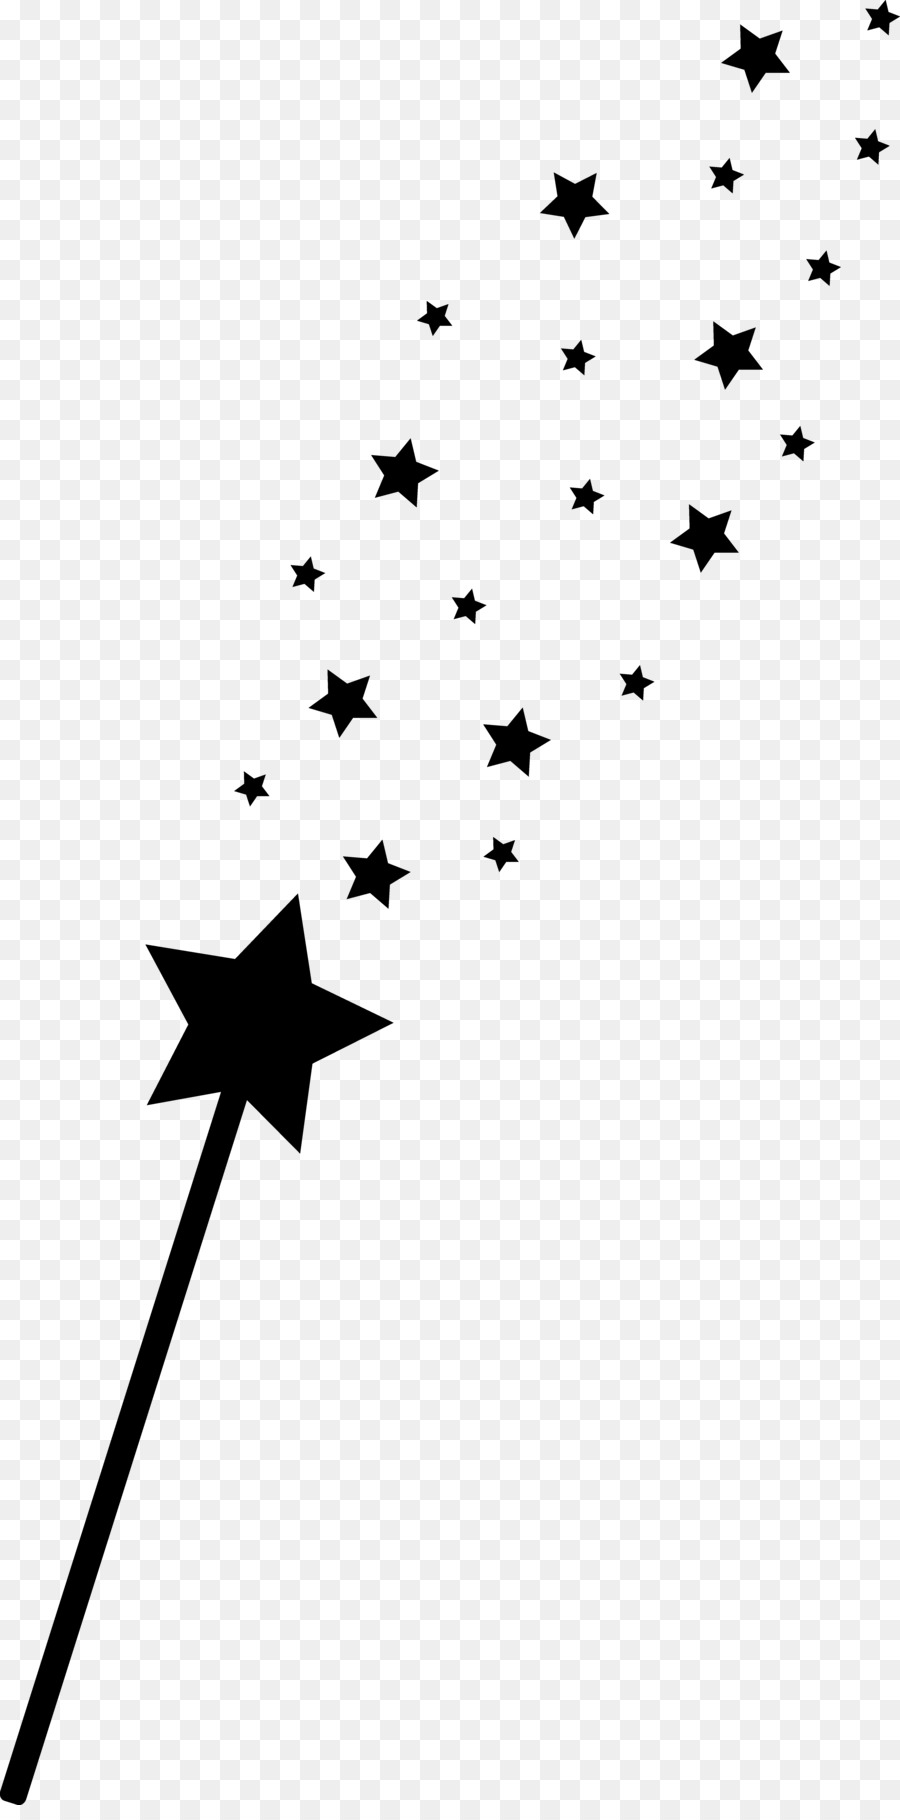 Download Wand Fairy Magic Clip art - Stars Silhouette png download ...